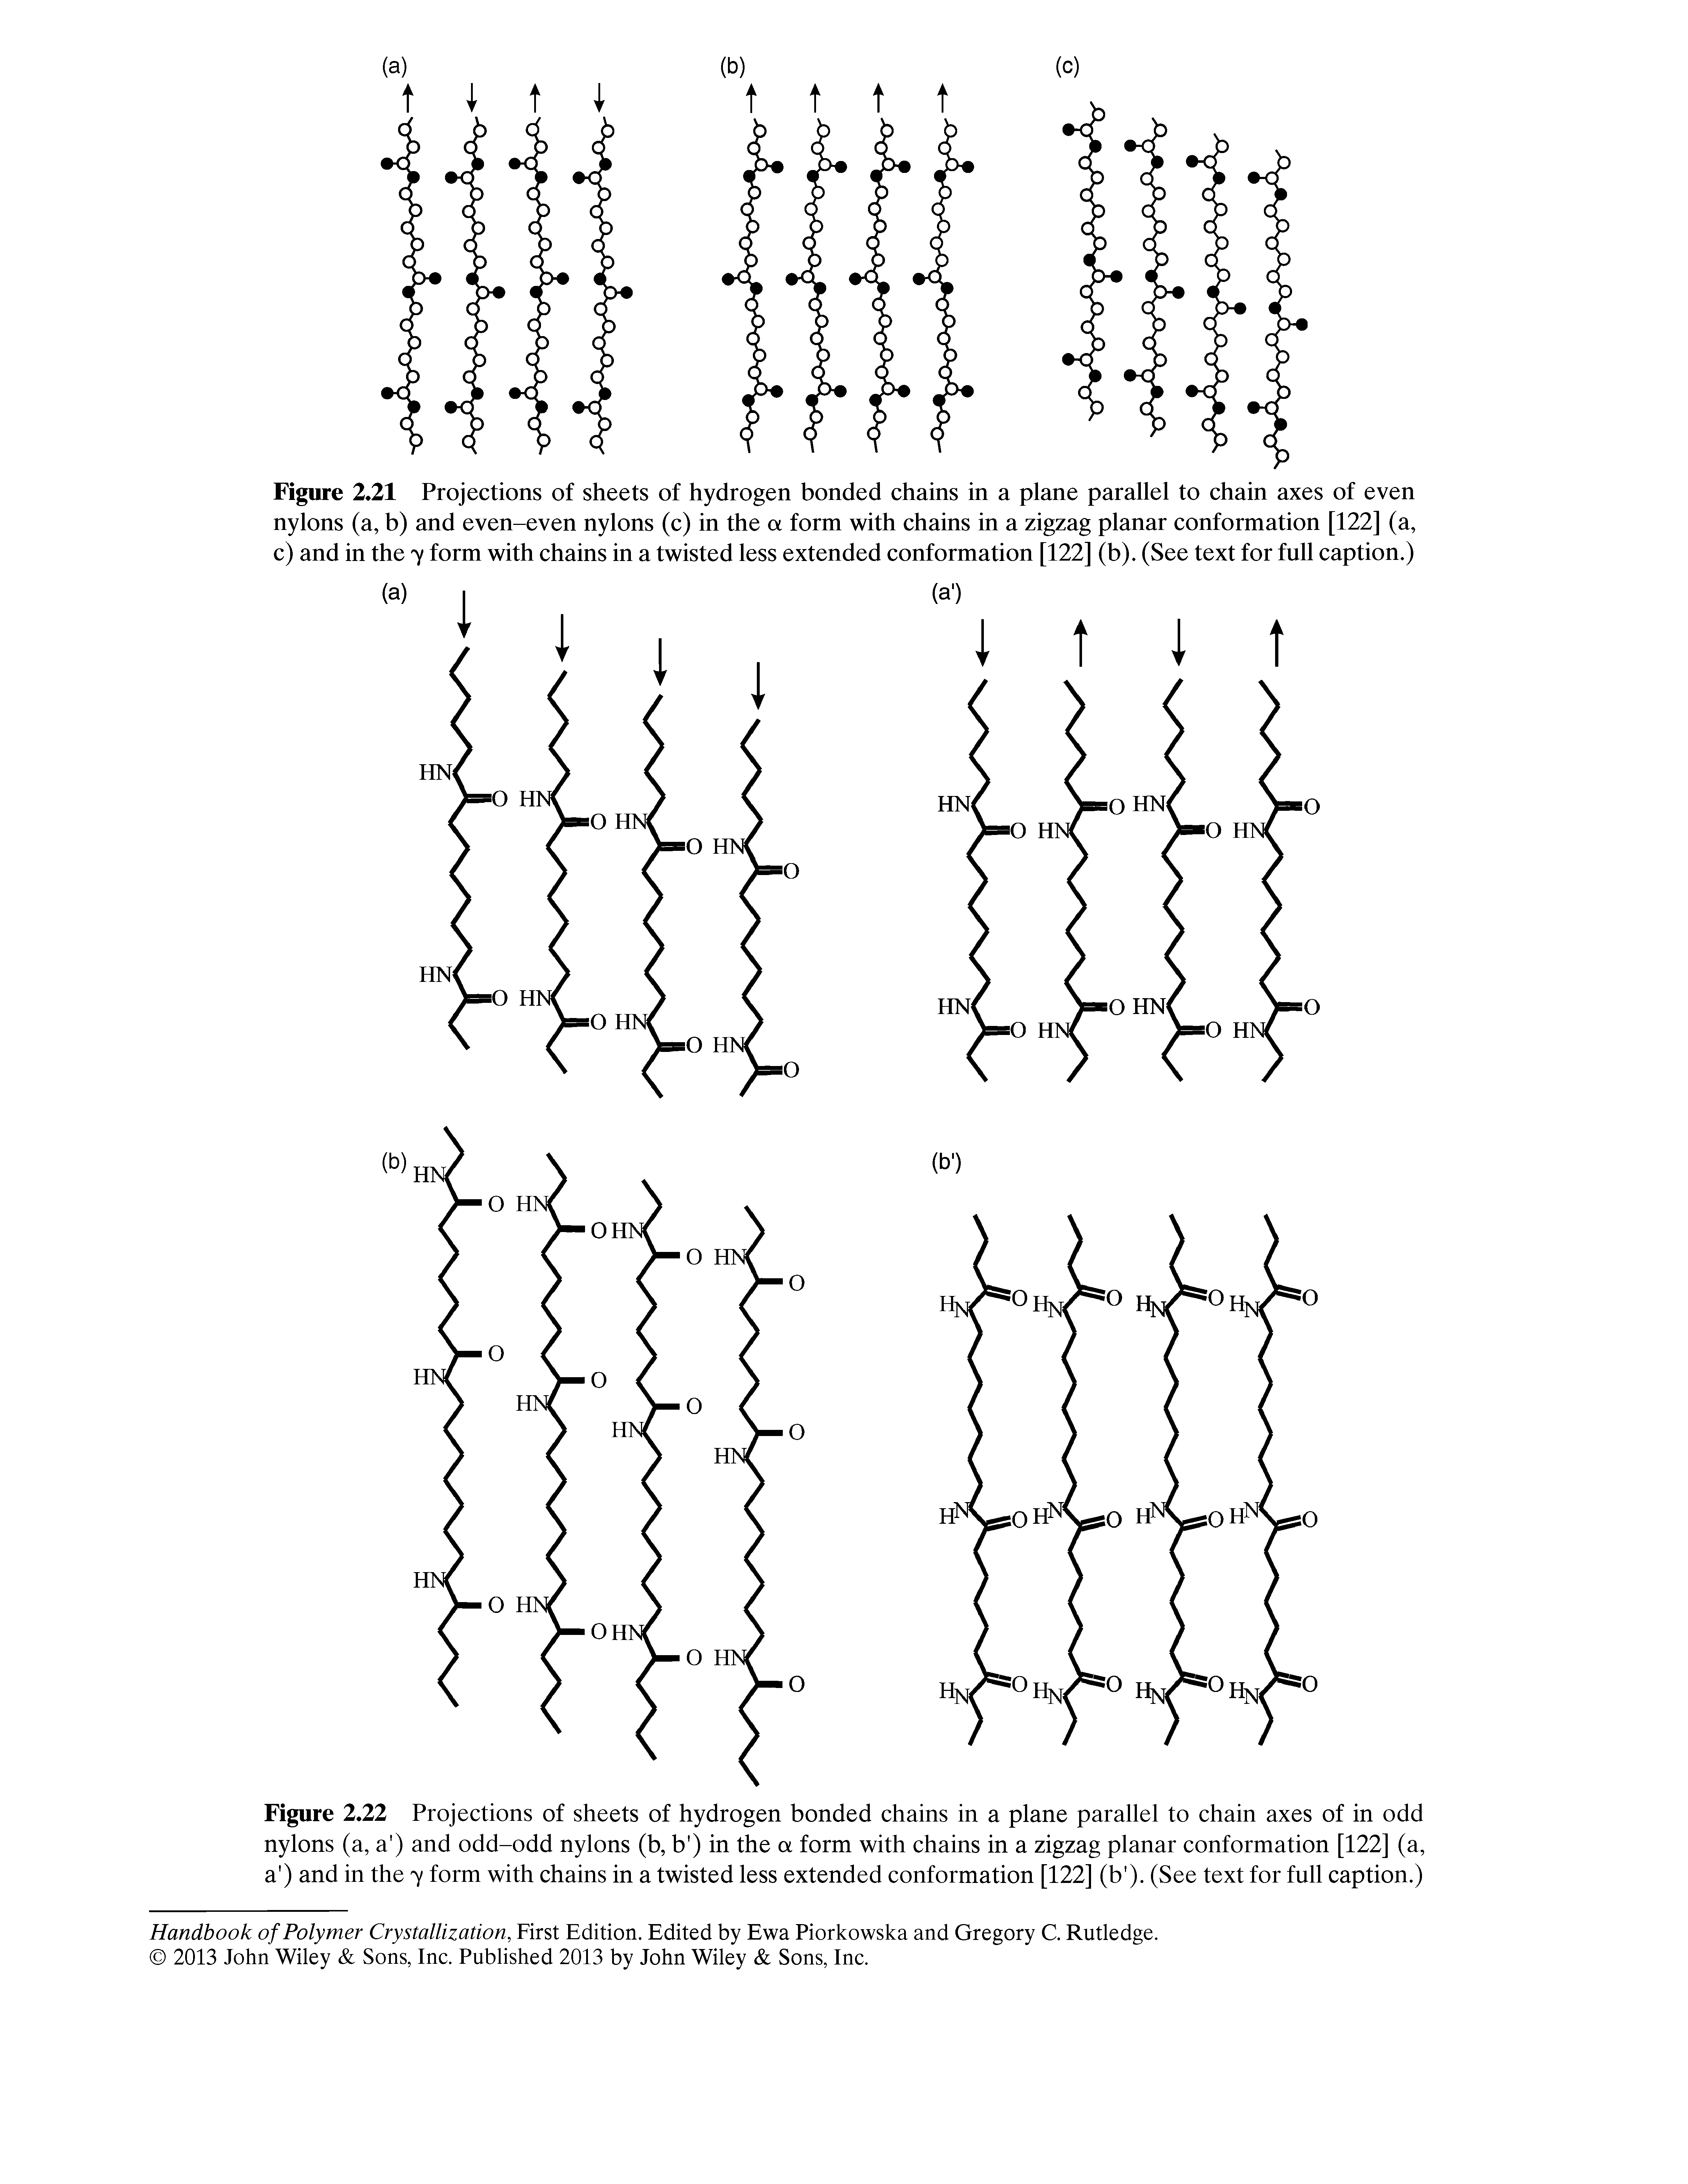 Figure 2.21 Projections of sheets of hydrogen bonded chains in a plane parallel to chain axes of even nylons (a, b) and even-even nylons (c) in the ot form with chains in a zigzag planar conformation [122] (a, c) and in the 7 form with chains in a twisted less extended conformation [122] (b). (See text for full caption.)...